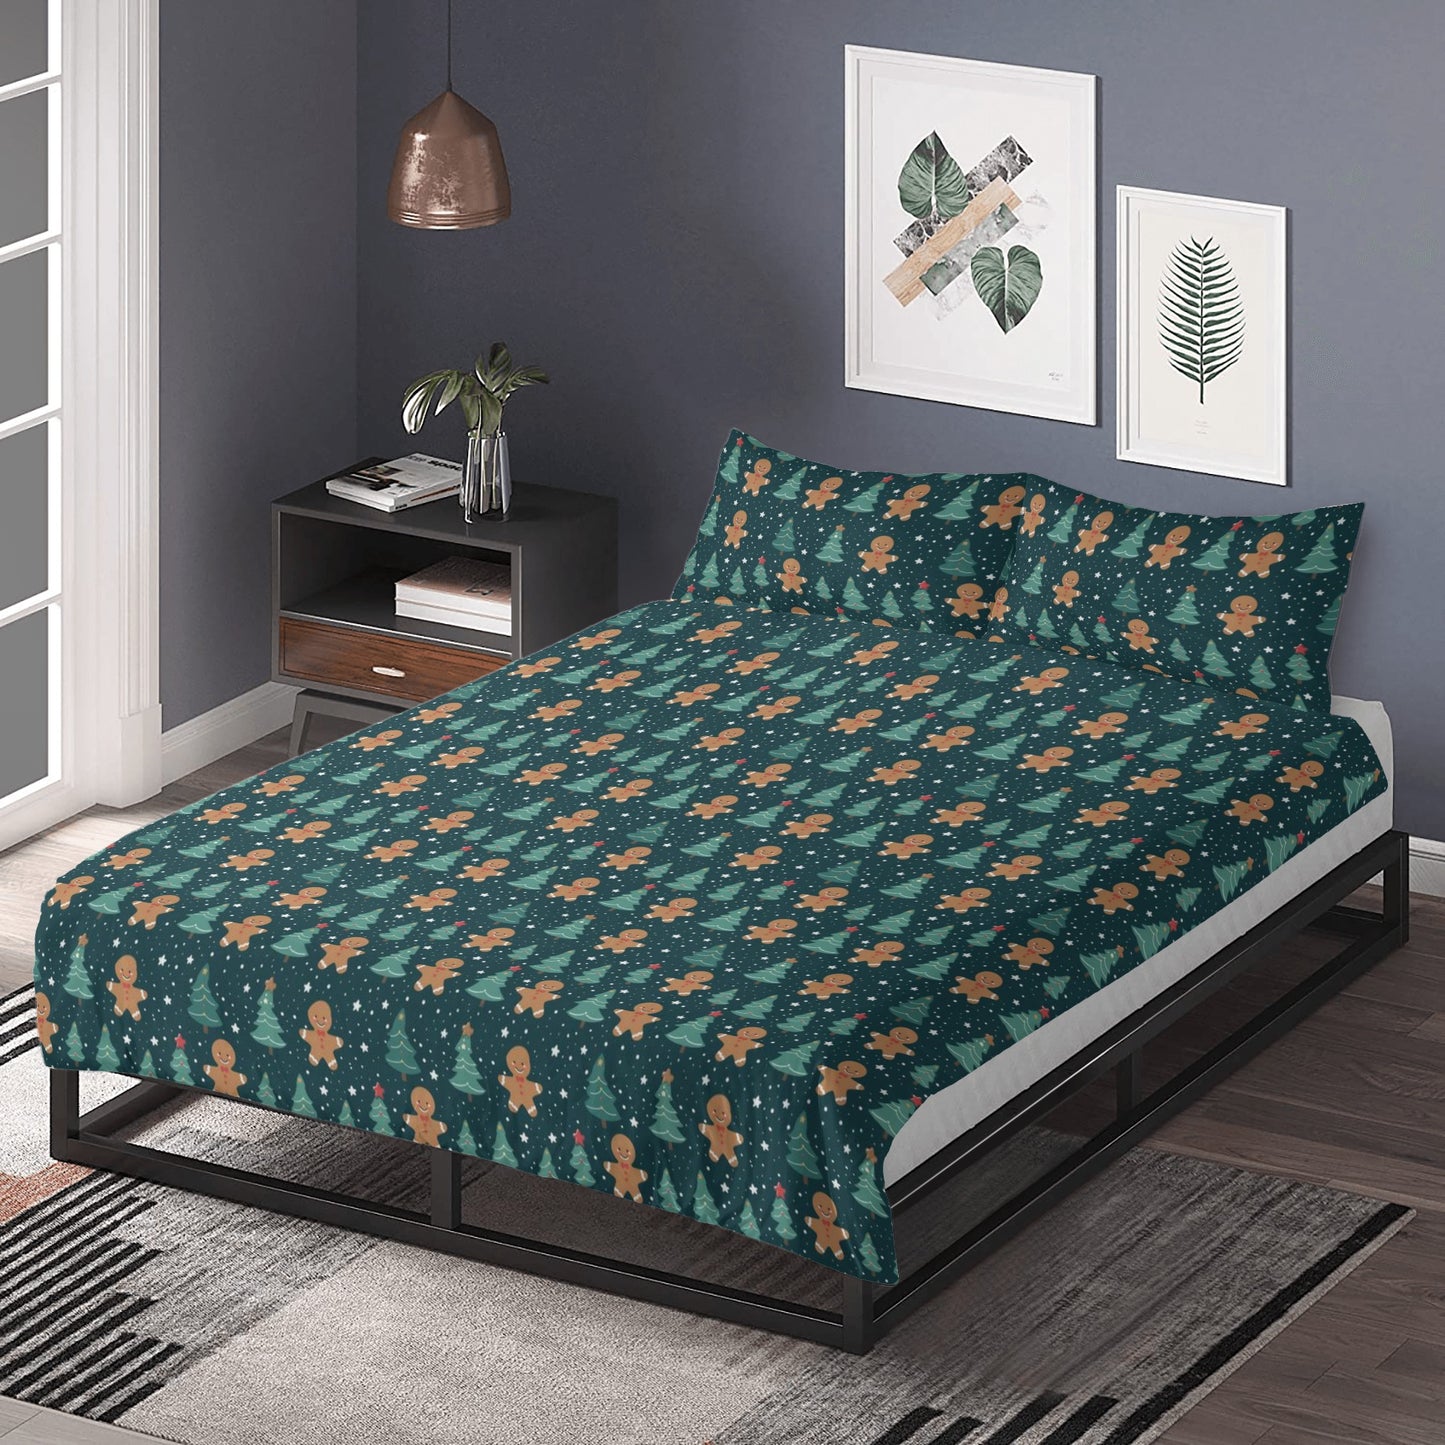 Gingerbread Man Bedding 3pc Set, Christmas Xmas Green Trees One Duvet Cover and Two Pillow Covers King Queen Full Twin Size Bed Bedroom